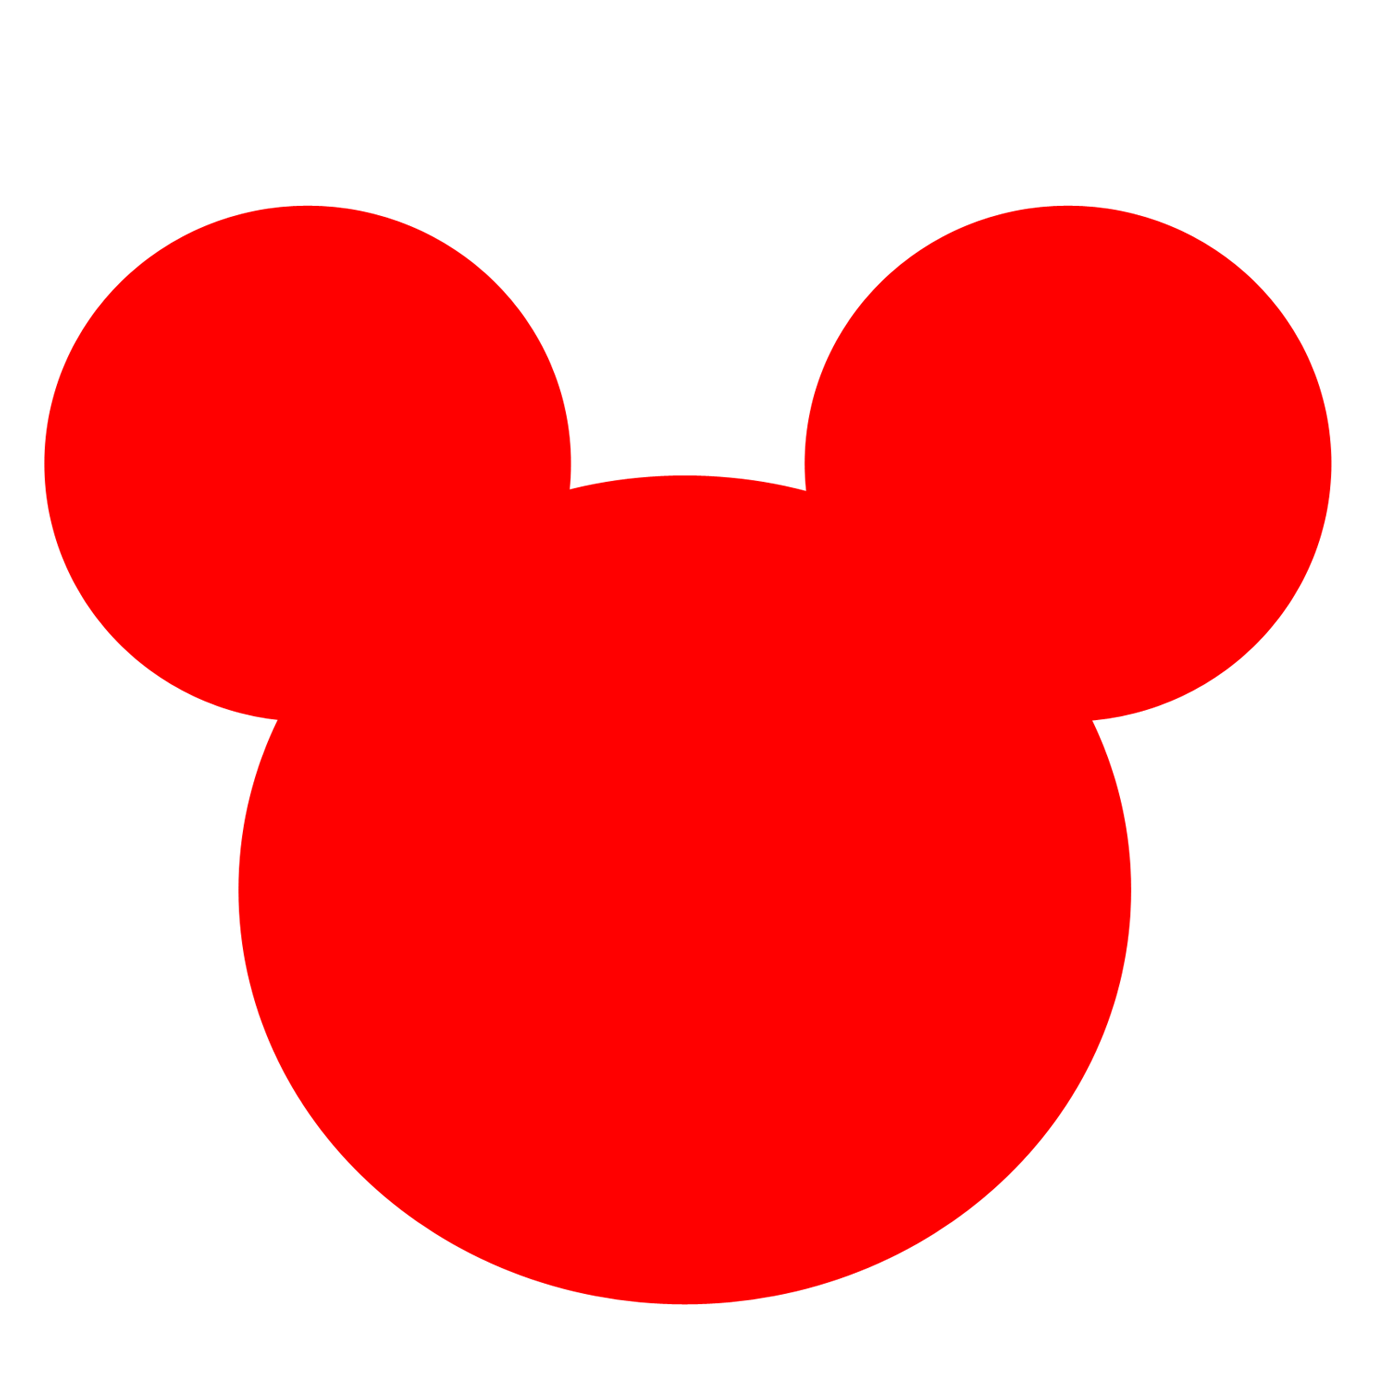 Red Mouse Logo - Free Mickey Mouse Logo, Download Free Clip Art, Free Clip Art on ...